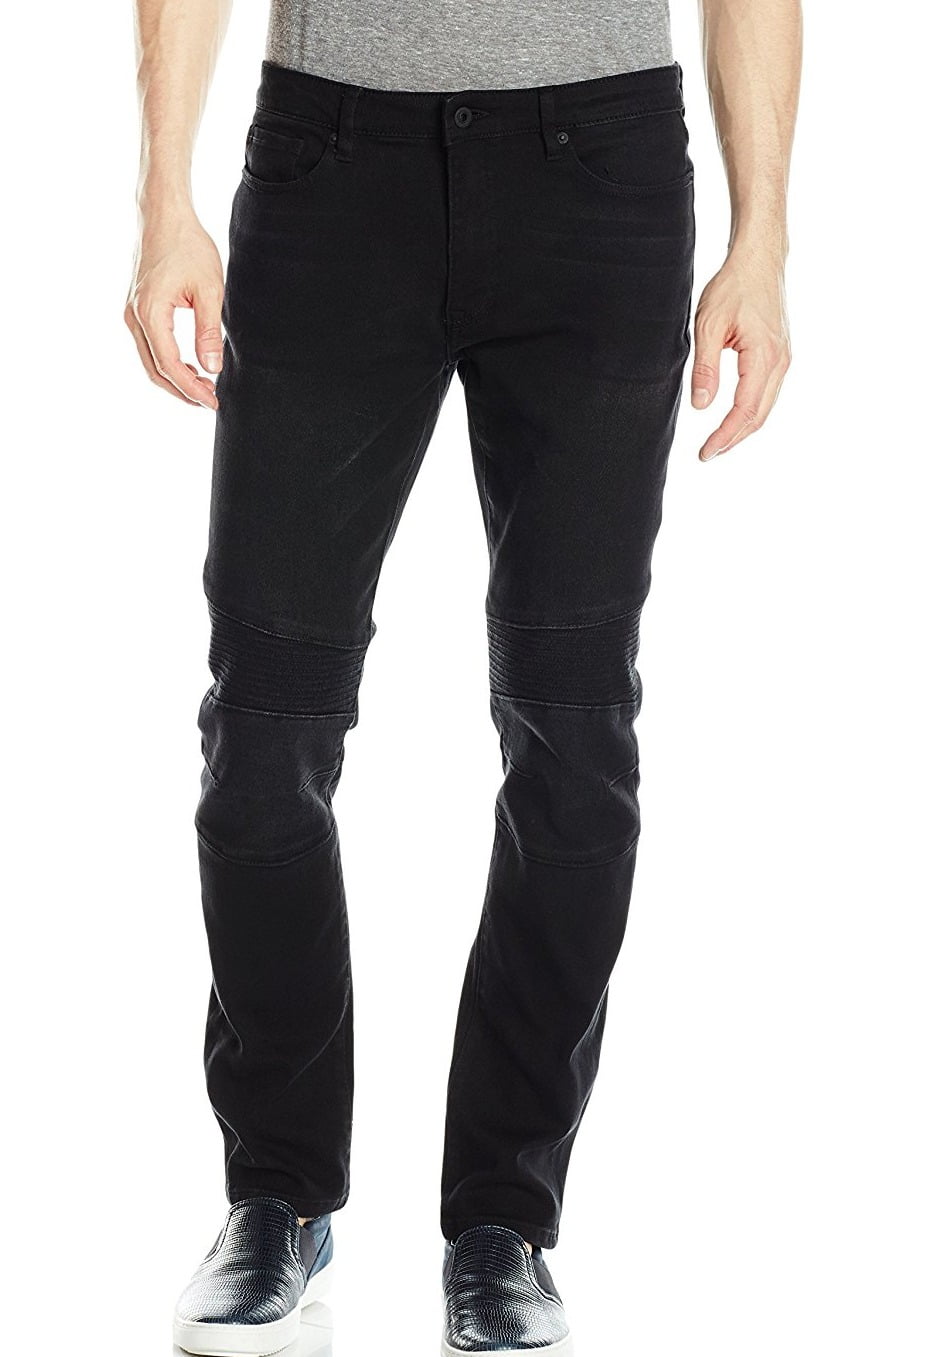 Kenneth Cole Reaction - Reaction Kenneth Cole NEW Black Mens Size 33 ...